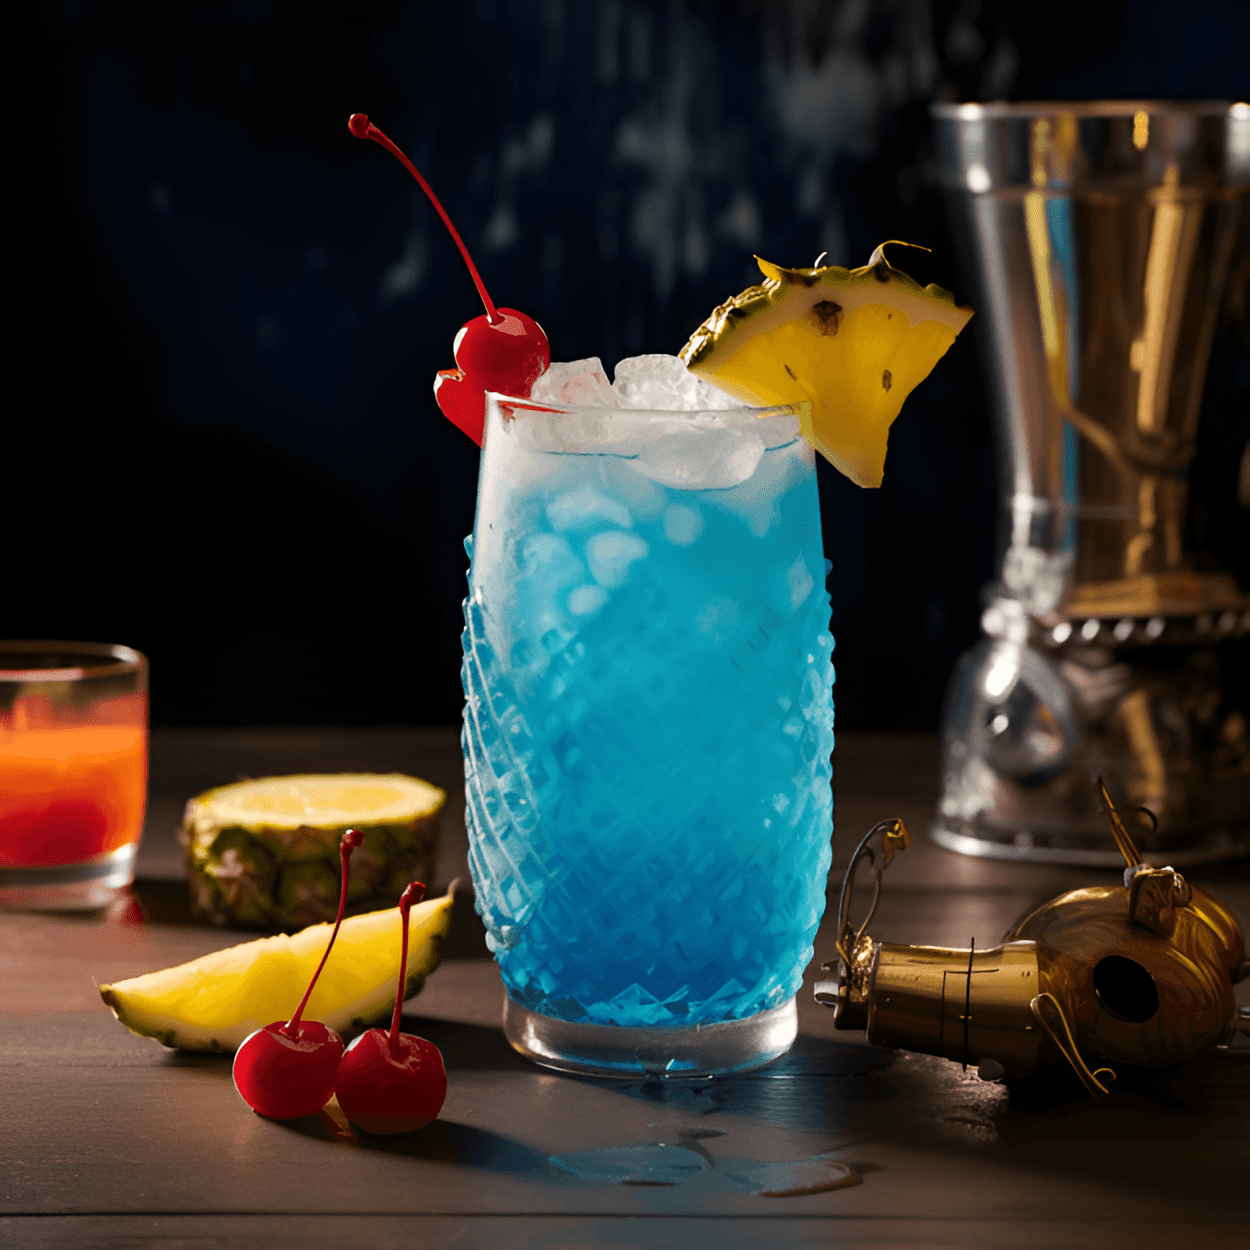 Blue Planet Cocktail Recipe - The Blue Planet cocktail has a sweet, fruity, and slightly sour taste. It has a strong citrus note from the lemon juice, balanced by the sweetness of the blue curacao and pineapple juice. The vodka gives it a strong kick, while the coconut cream adds a creamy, tropical twist to the drink.